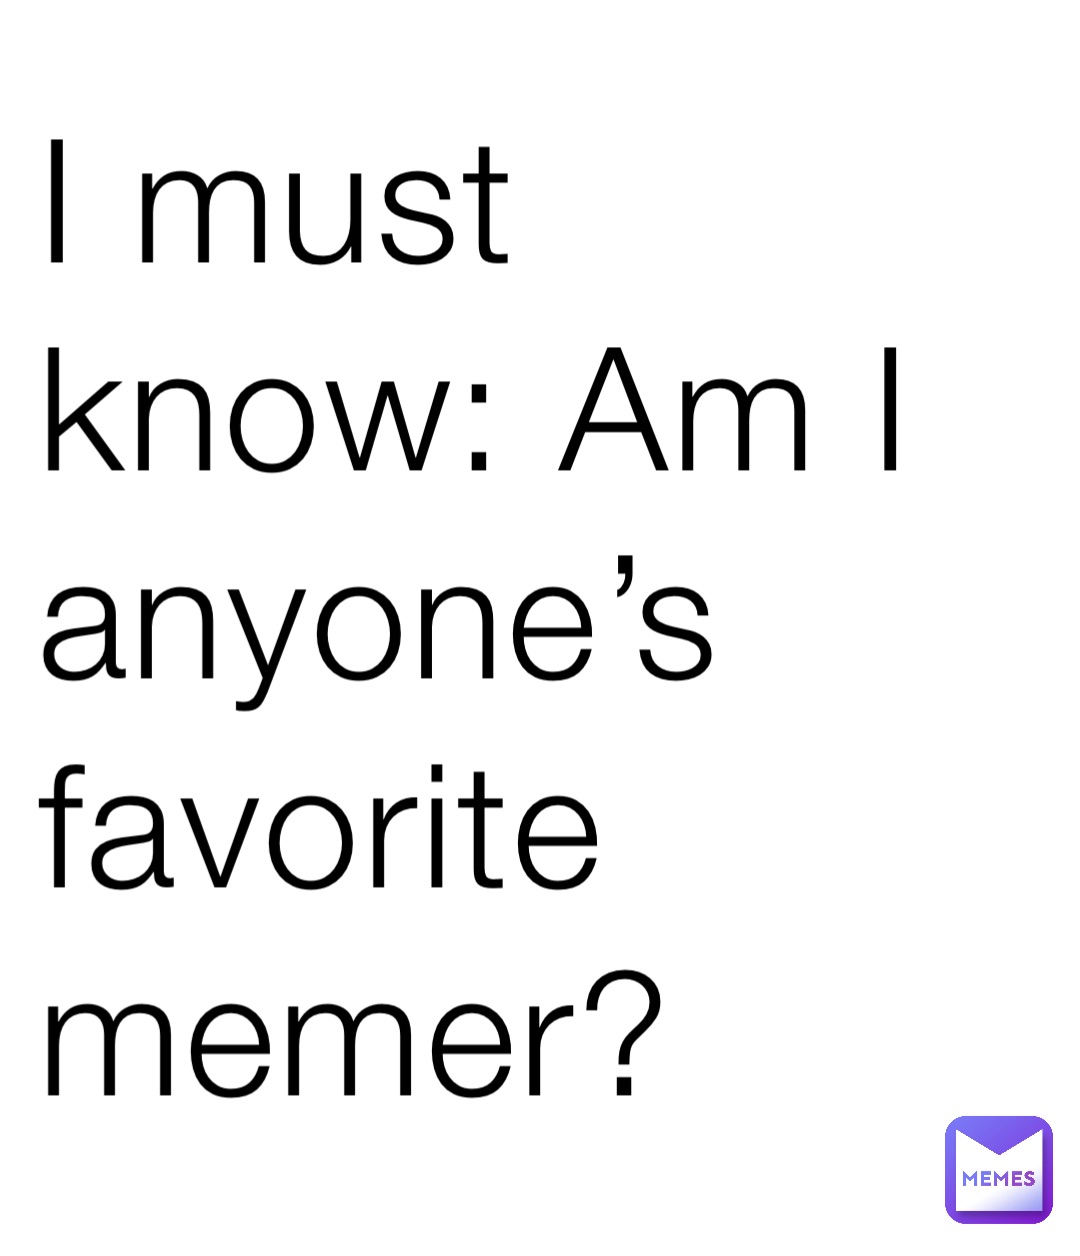 I must know: Am I anyone’s favorite memer?